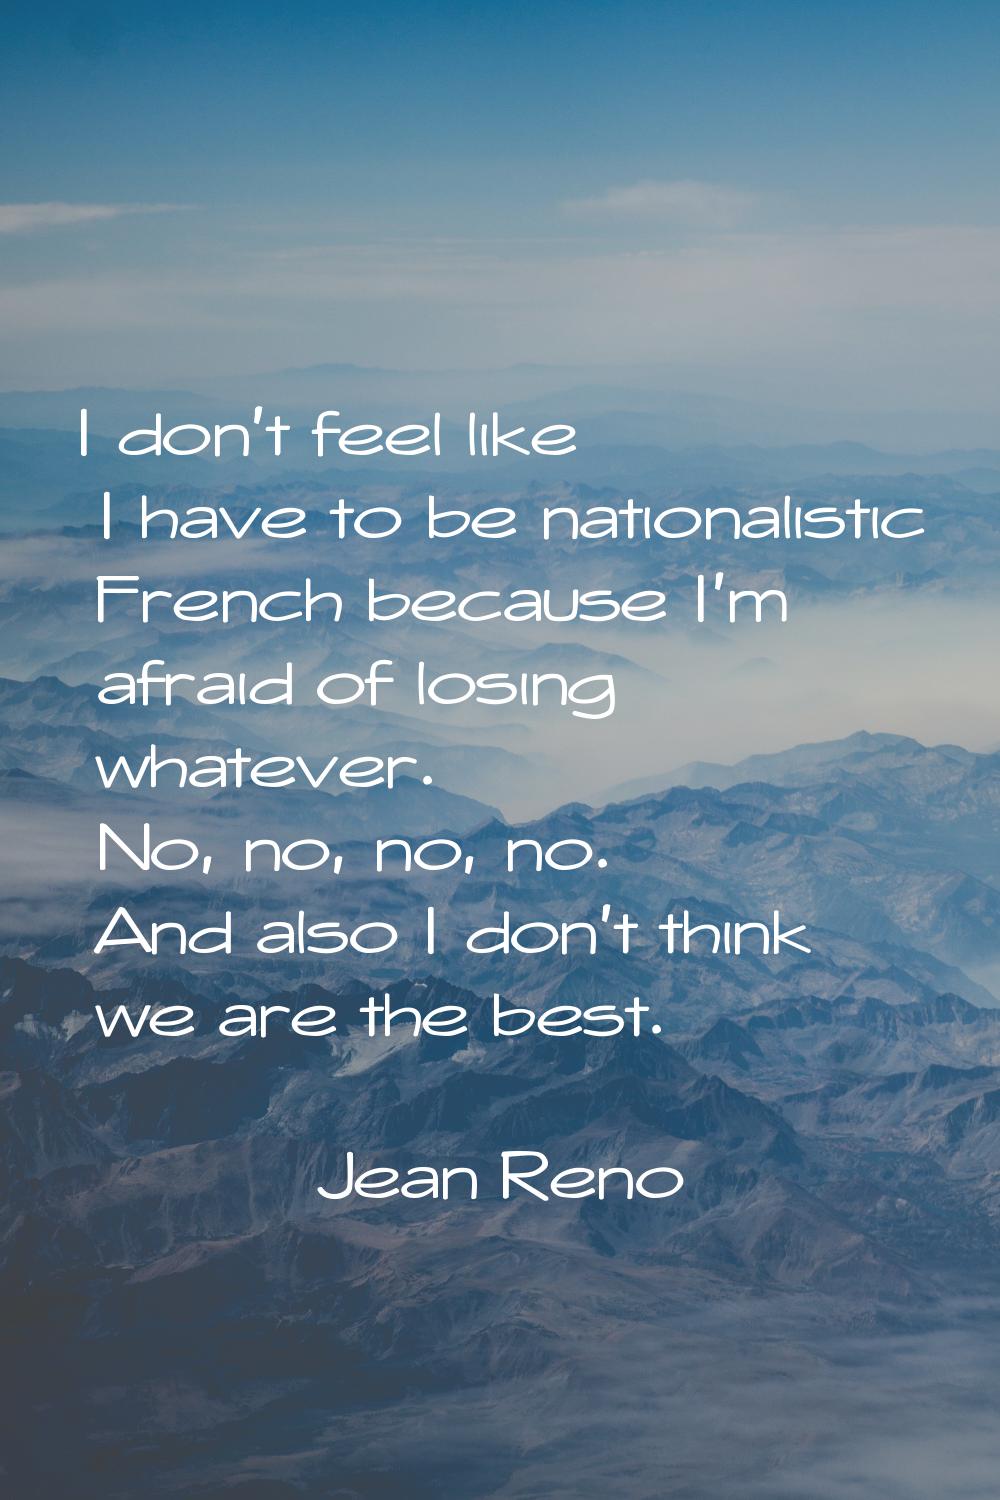 I don't feel like I have to be nationalistic French because I'm afraid of losing whatever. No, no, 